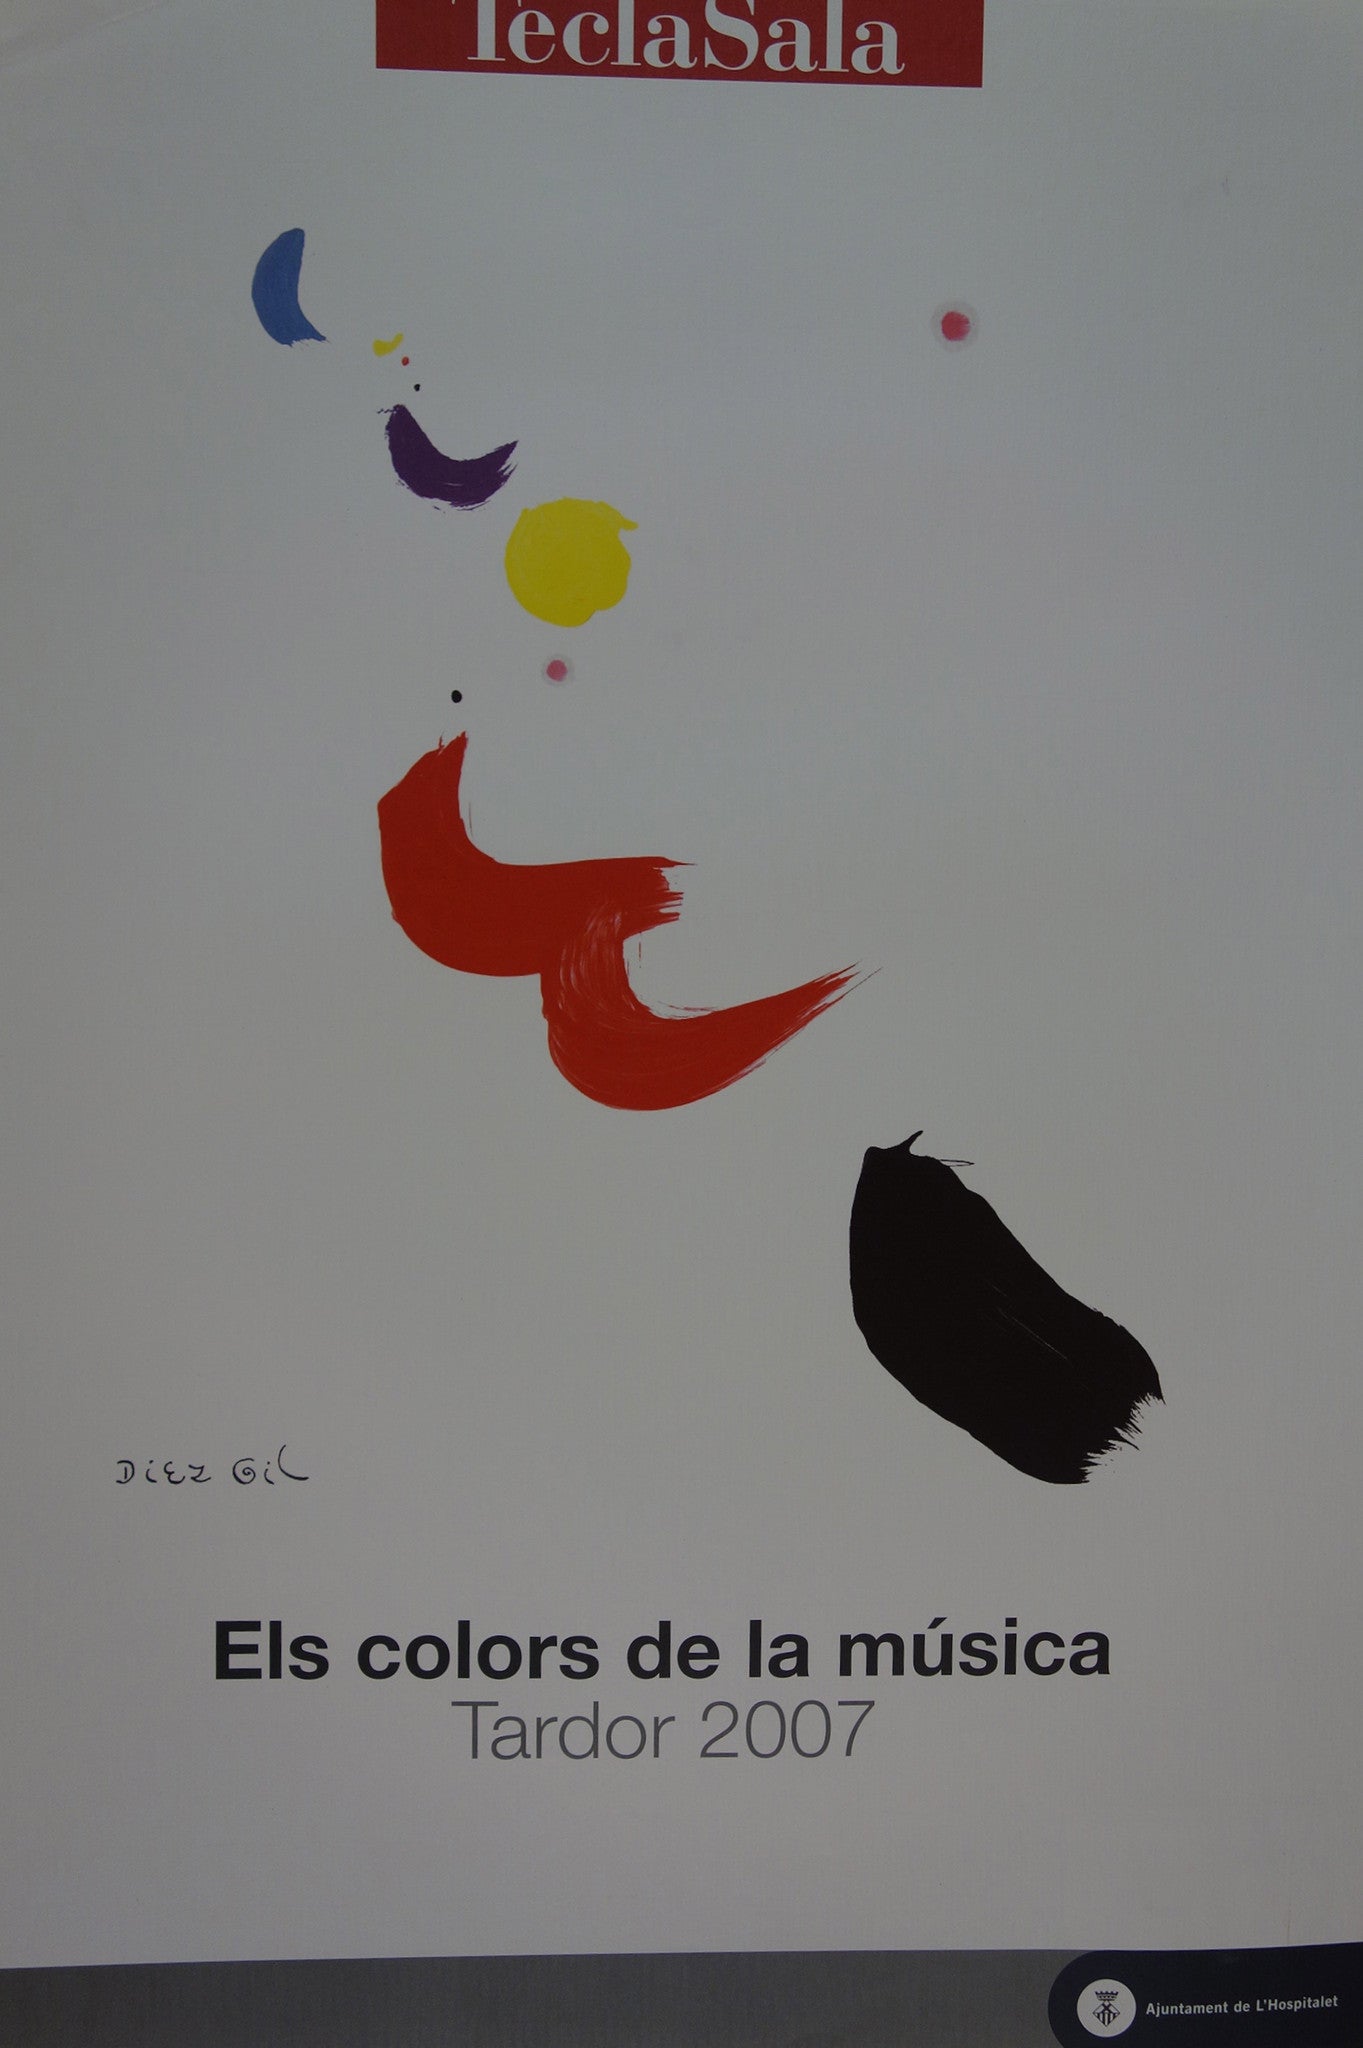 The Music Colors